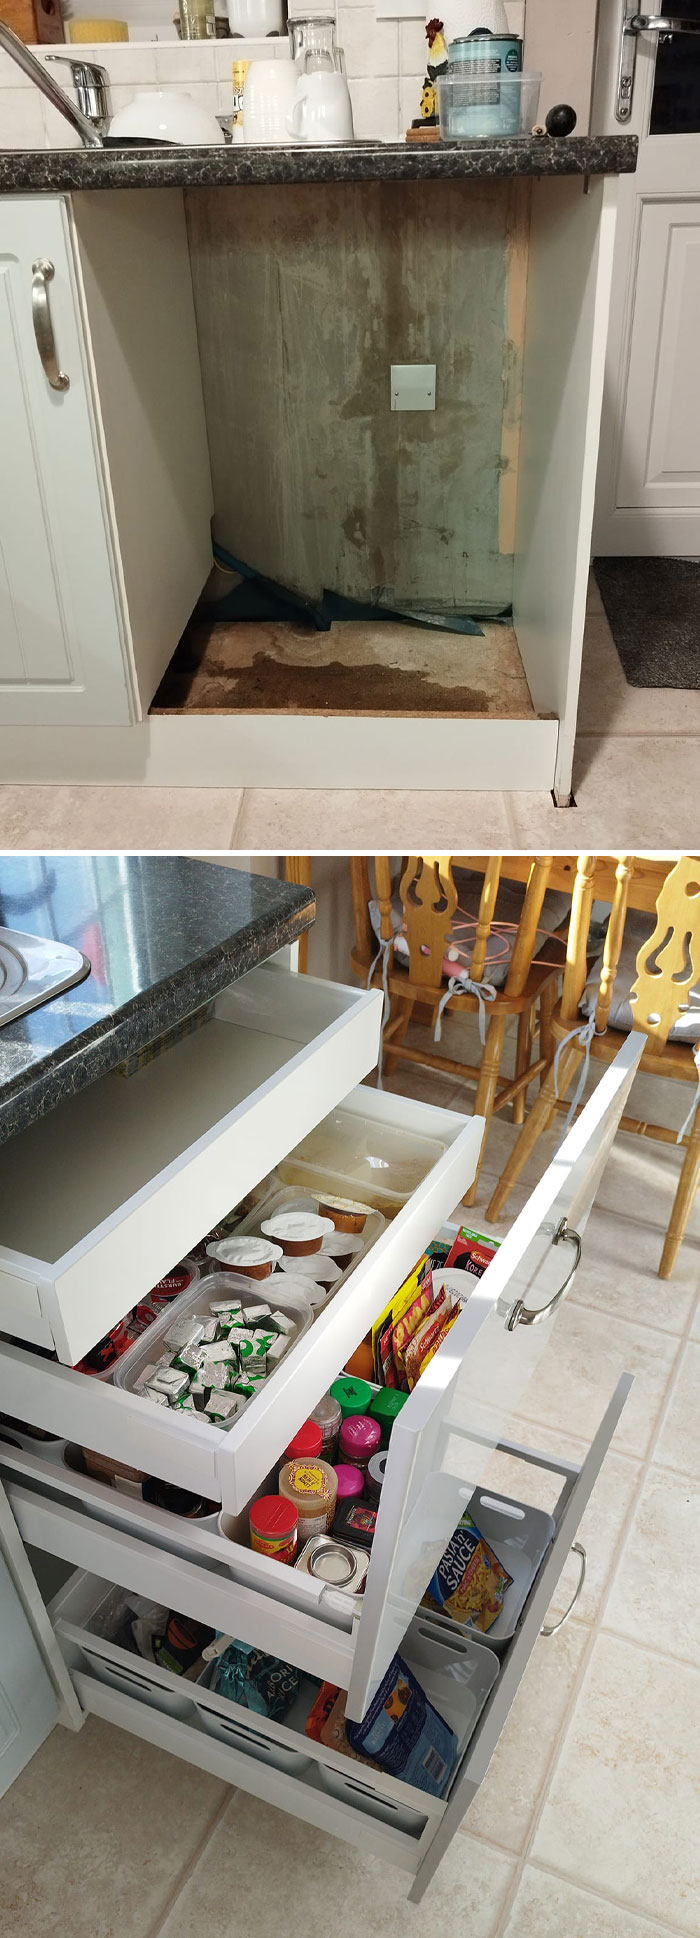 After Removing An Integrated Dishwasher